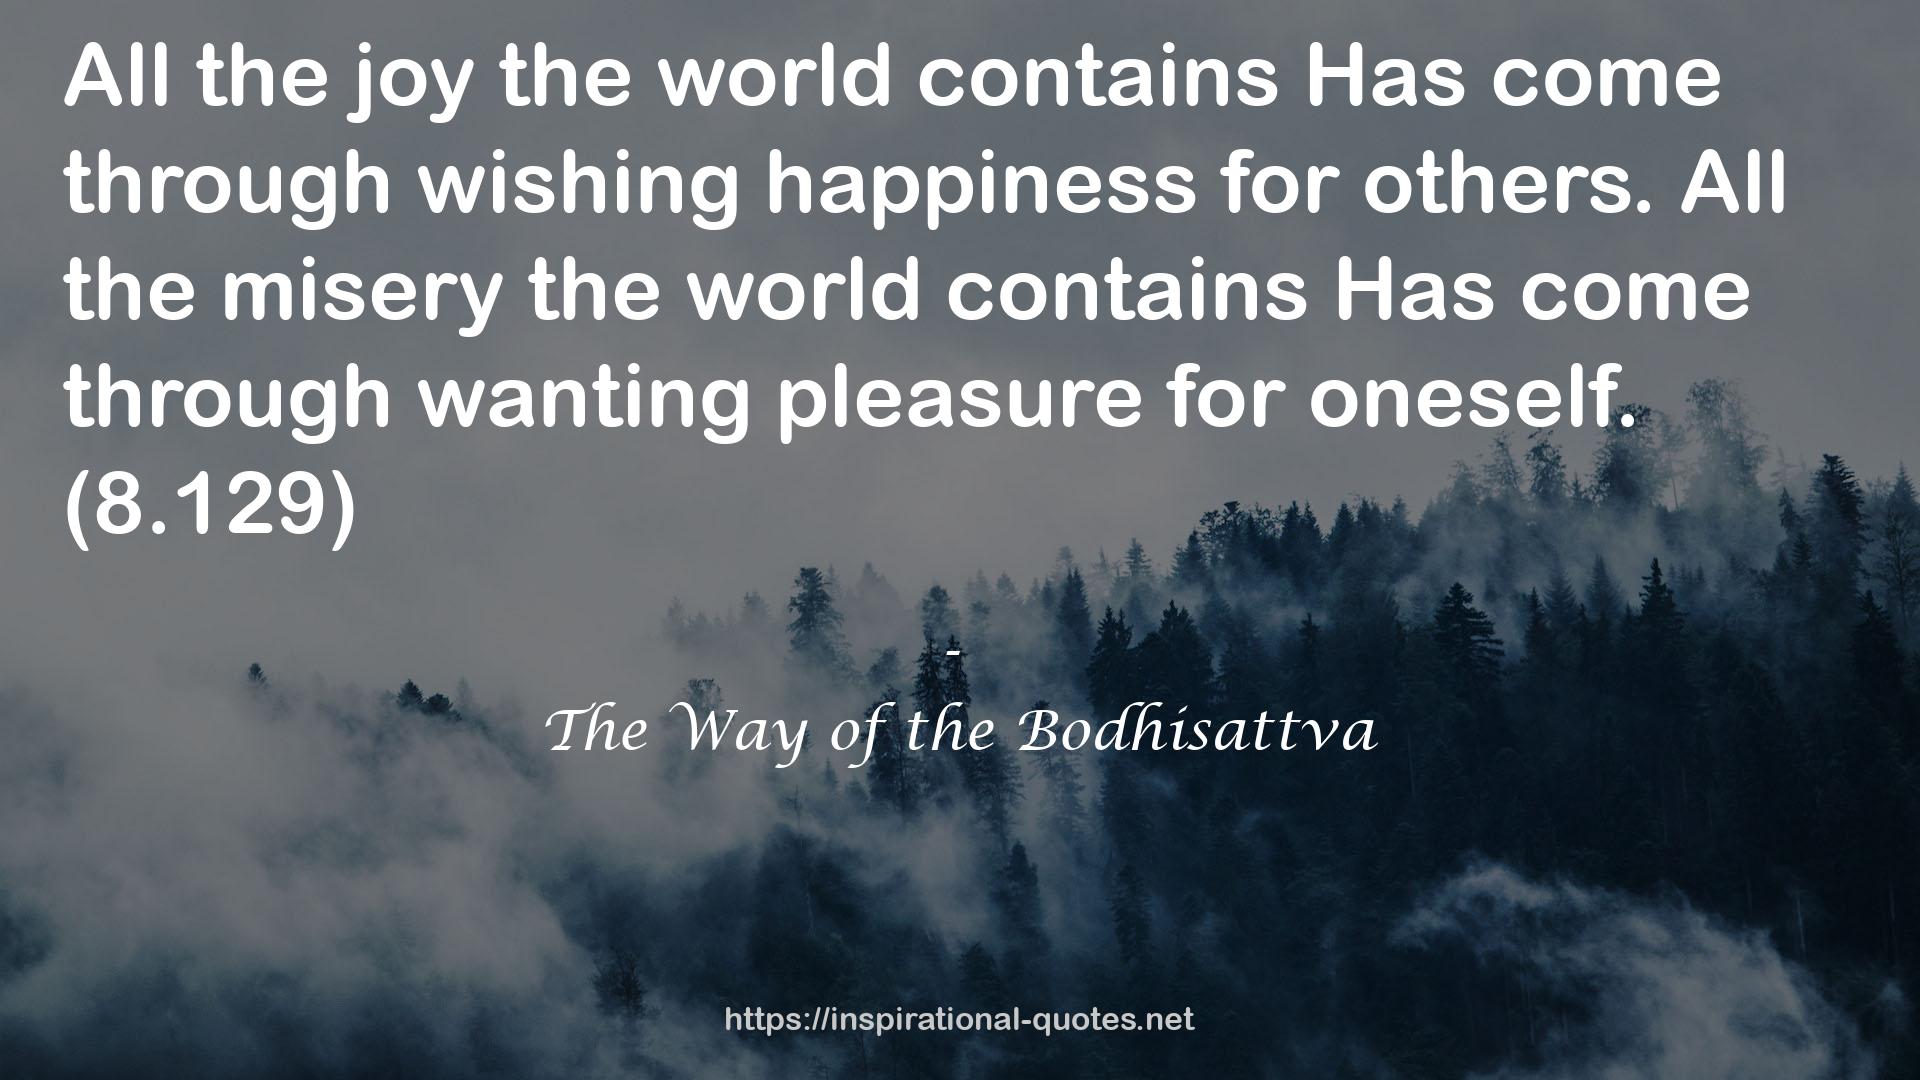 The Way of the Bodhisattva QUOTES